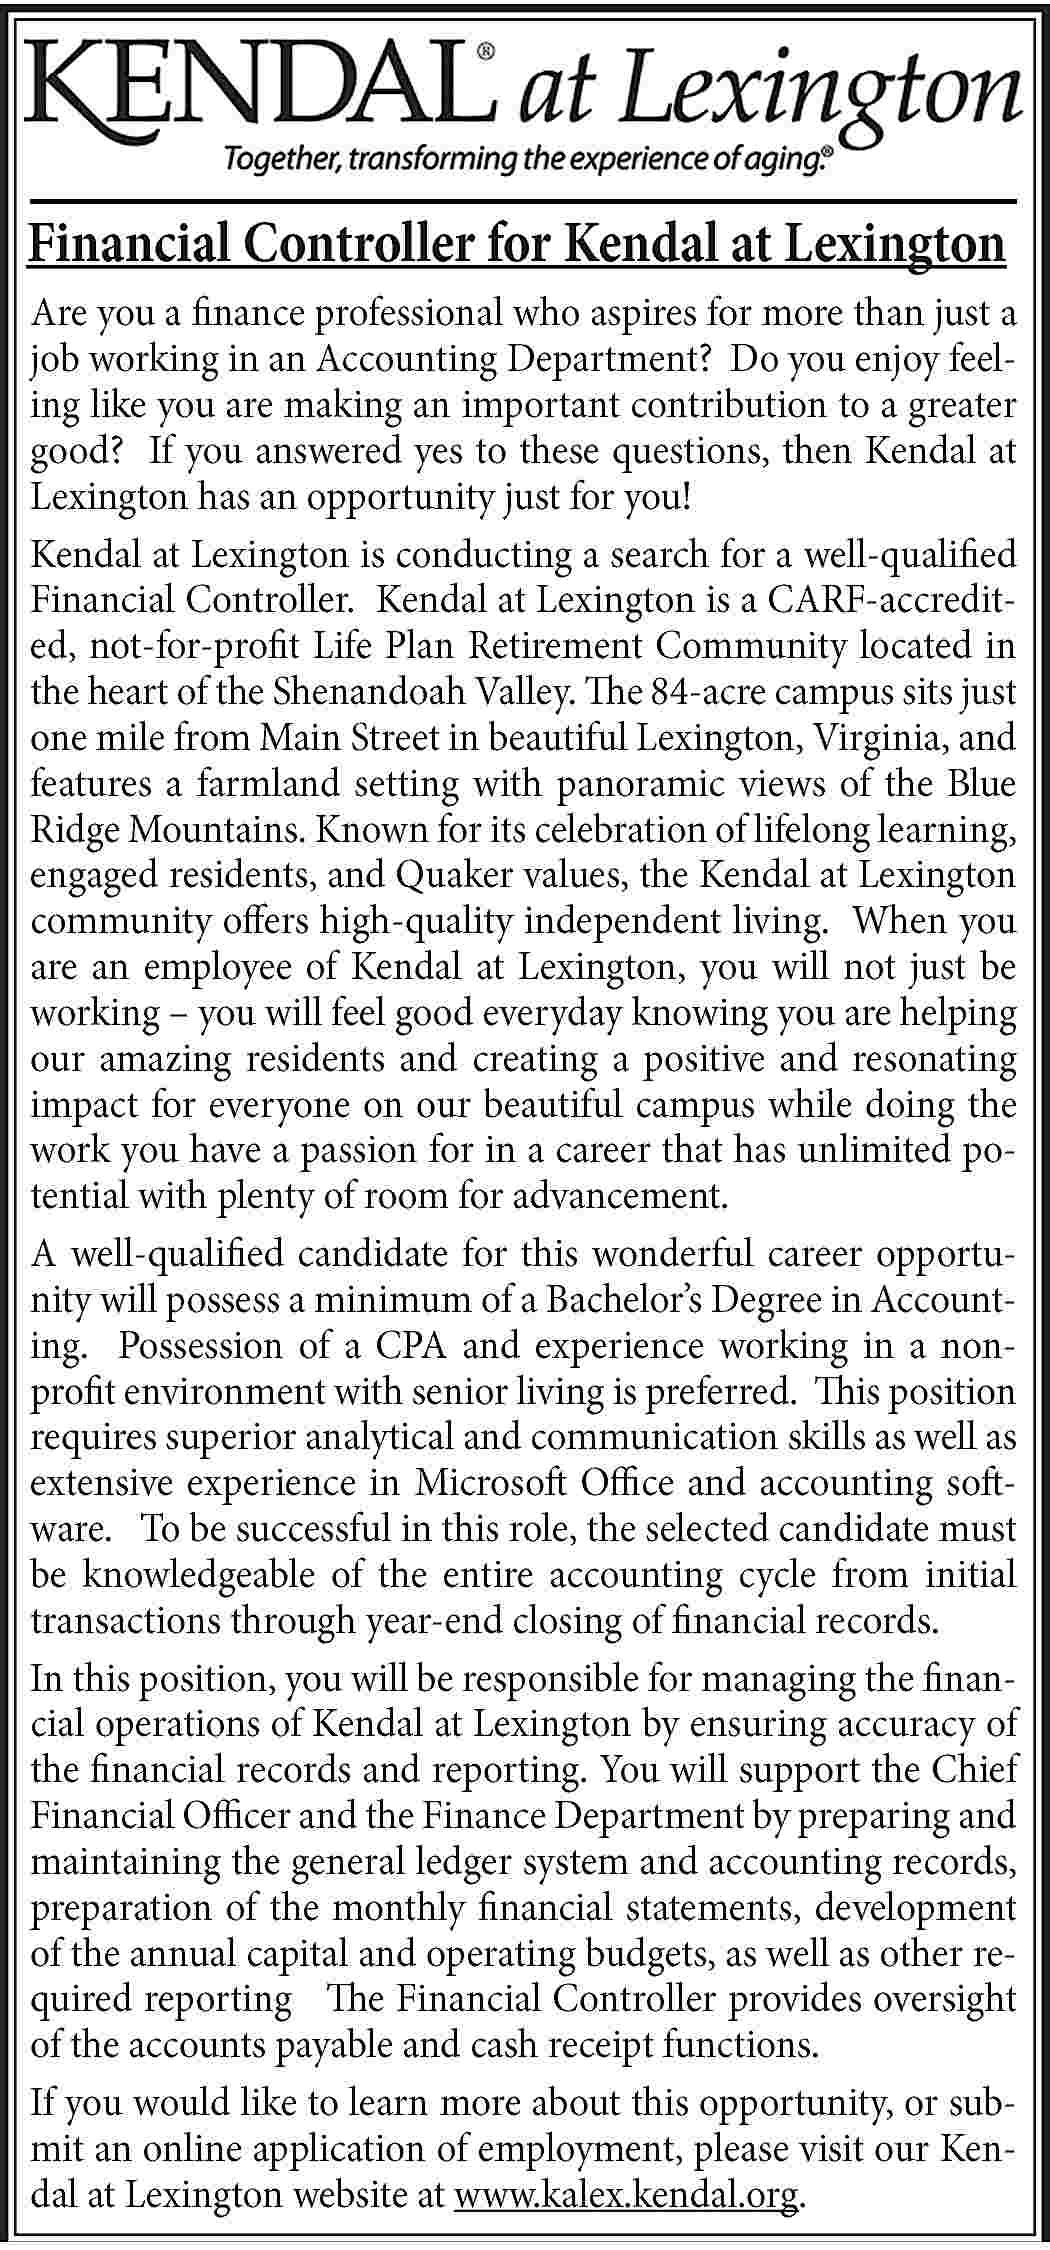 Financial Controller for Kendal at  Financial Controller for Kendal at Lexington Are you a finance professional who aspires for more than just a job working in an Accounting Department? Do you enjoy feeling like you are making an important contribution to a greater good? If you answered yes to these questions, then Kendal at Lexington has an opportunity just for you! Kendal at Lexington is conducting a search for a well-qualified Financial Controller. Kendal at Lexington is a CARF-accredited, not-for-profit Life Plan Retirement Community located in the heart of the Shenandoah Valley. The 84-acre campus sits just one mile from Main Street in beautiful Lexington, Virginia, and features a farmland setting with panoramic views of the Blue Ridge Mountains. Known for its celebration of lifelong learning, engaged residents, and Quaker values, the Kendal at Lexington community offers high-quality independent living. When you are an employee of Kendal at Lexington, you will not just be working – you will feel good everyday knowing you are helping our amazing residents and creating a positive and resonating impact for everyone on our beautiful campus while doing the work you have a passion for in a career that has unlimited potential with plenty of room for advancement. A well-qualified candidate for this wonderful career opportunity will possess a minimum of a Bachelor’s Degree in Accounting. Possession of a CPA and experience working in a nonprofit environment with senior living is preferred. This position requires superior analytical and communication skills as well as extensive experience in Microsoft Office and accounting software. To be successful in this role, the selected candidate must be knowledgeable of the entire accounting cycle from initial transactions through year-end closing of financial records. In this position, you will be responsible for managing the financial operations of Kendal at Lexington by ensuring accuracy of the financial records and reporting. You will support the Chief Financial Officer and the Finance Department by preparing and maintaining the general ledger system and accounting records, preparation of the monthly financial statements, development of the annual capital and operating budgets, as well as other required reporting The Financial Controller provides oversight of the accounts payable and cash receipt functions. If you would like to learn more about this opportunity, or submit an online application of employment, please visit our Kendal at Lexington website at www.kalex.kendal.org.